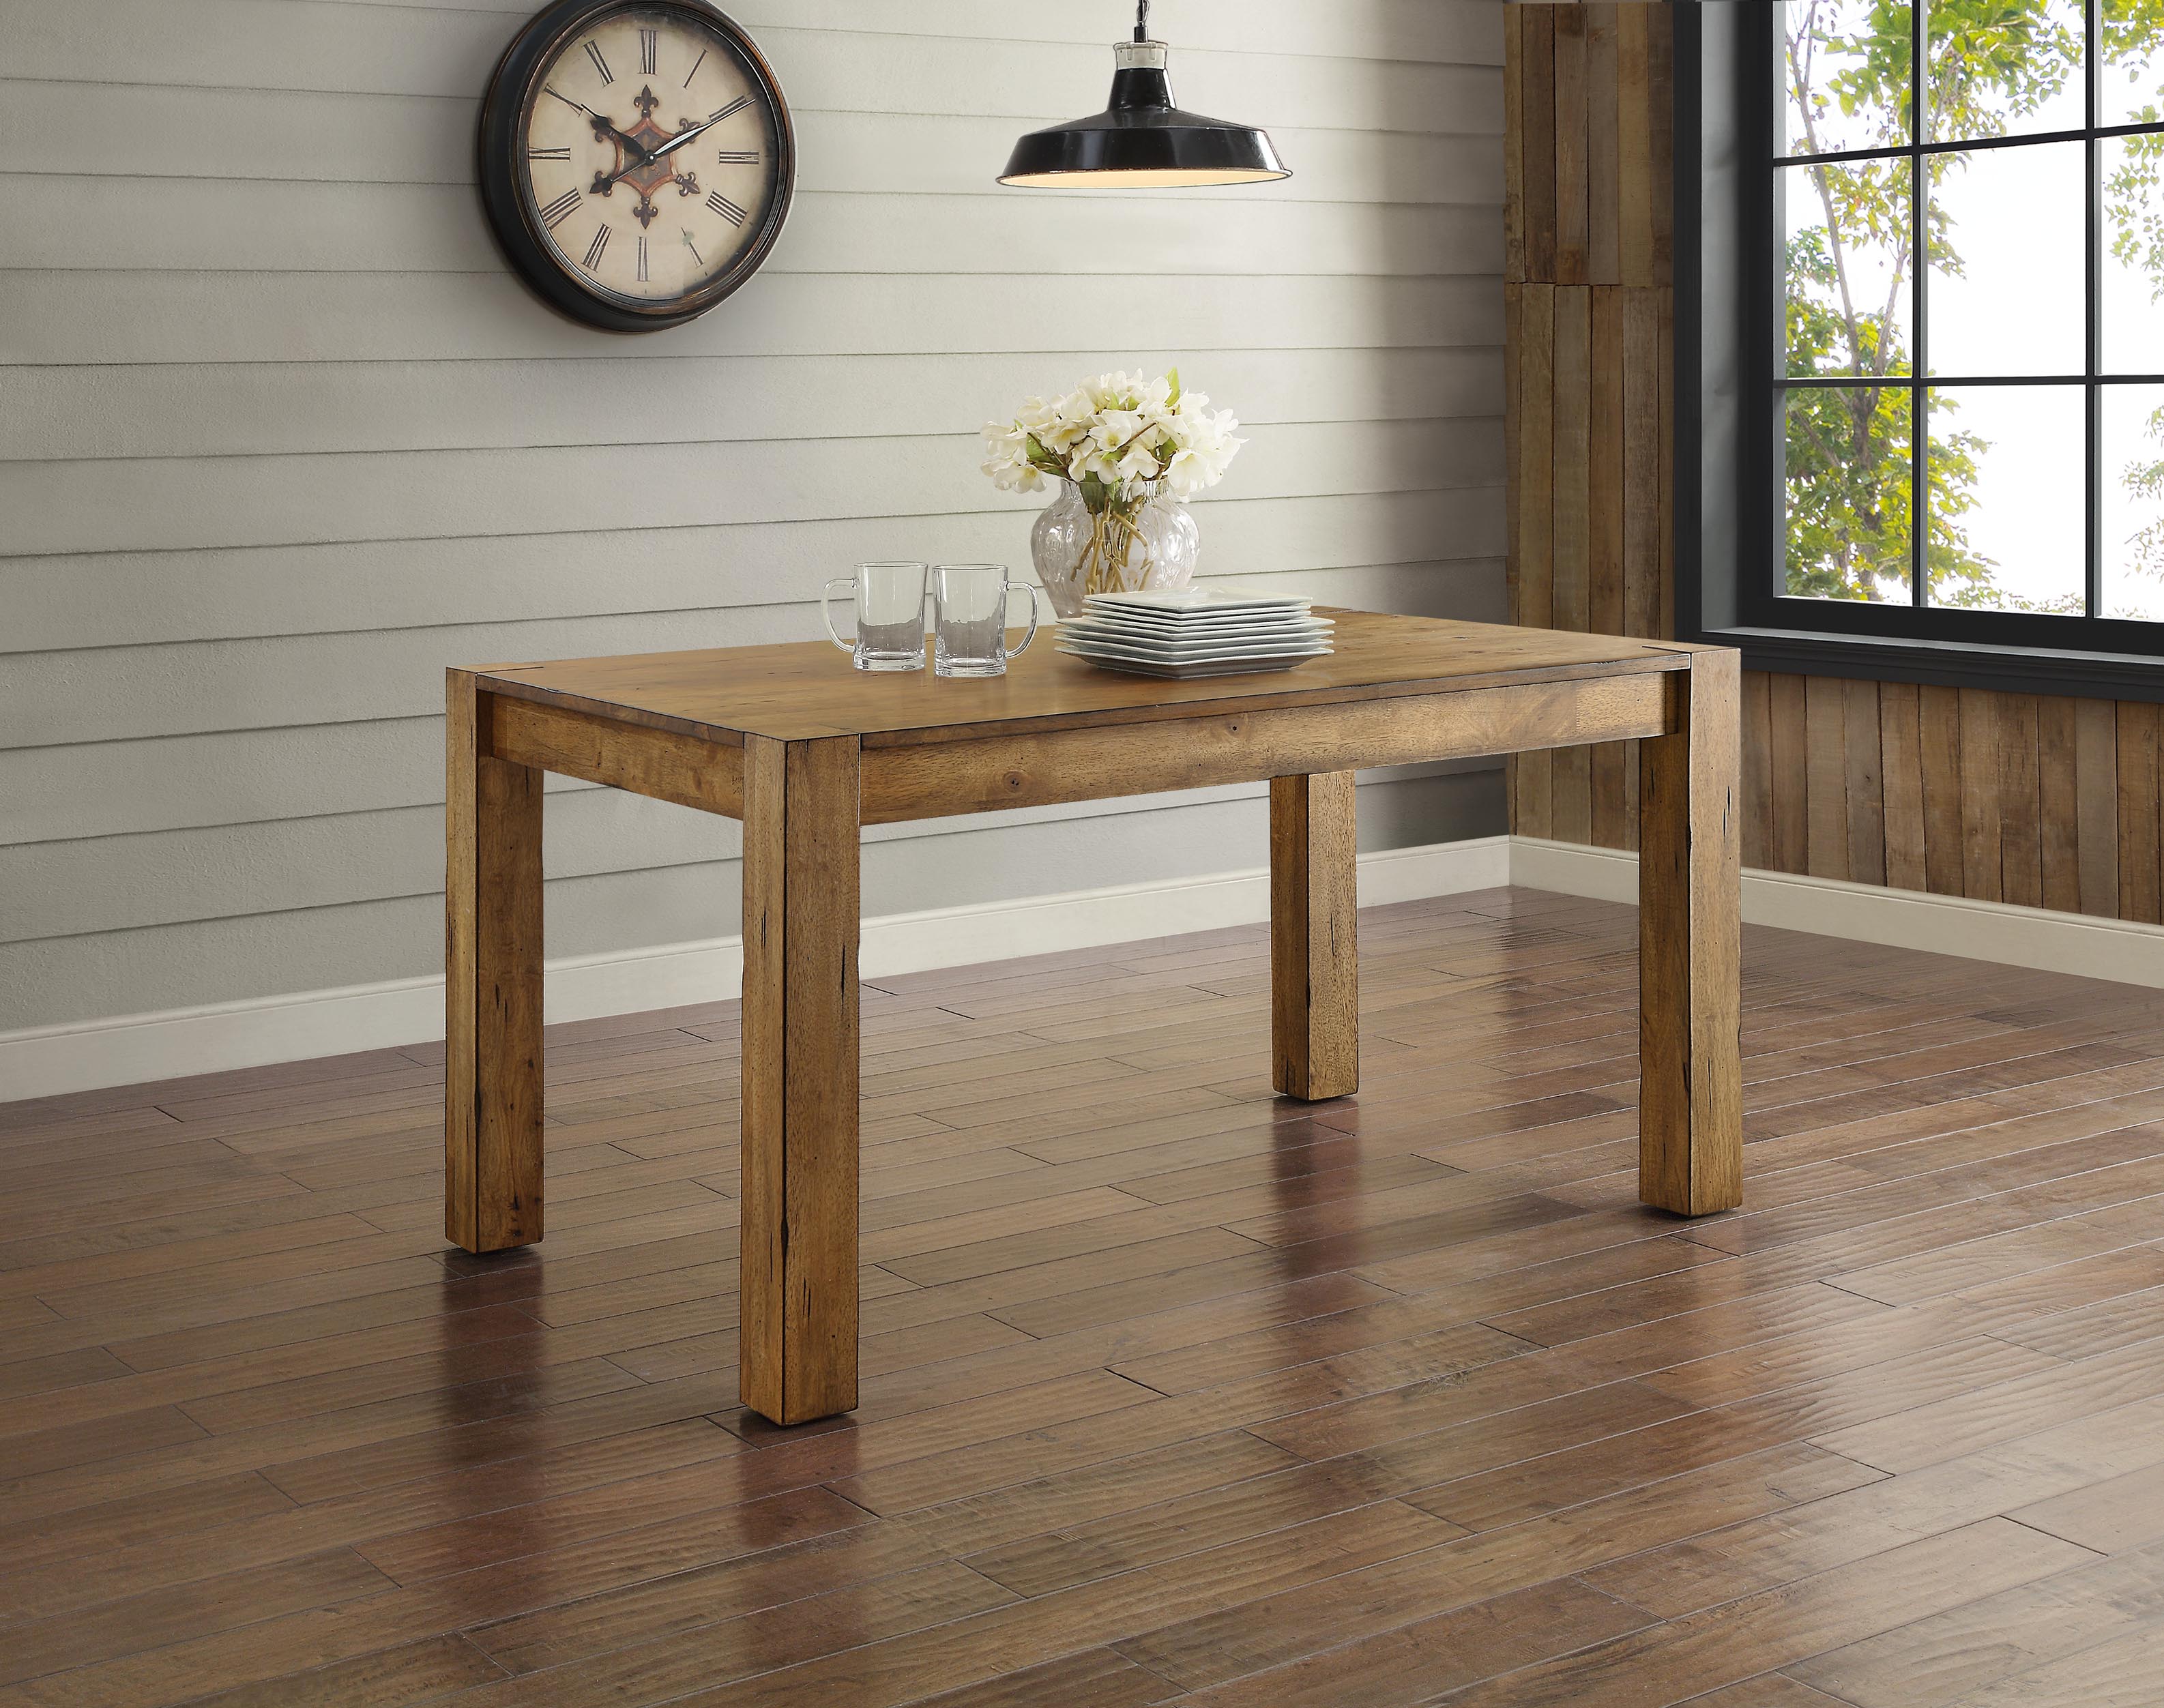 Better Homes & Gardens Bryant Solid Wood Dining Table, Rustic Brown - image 11 of 14